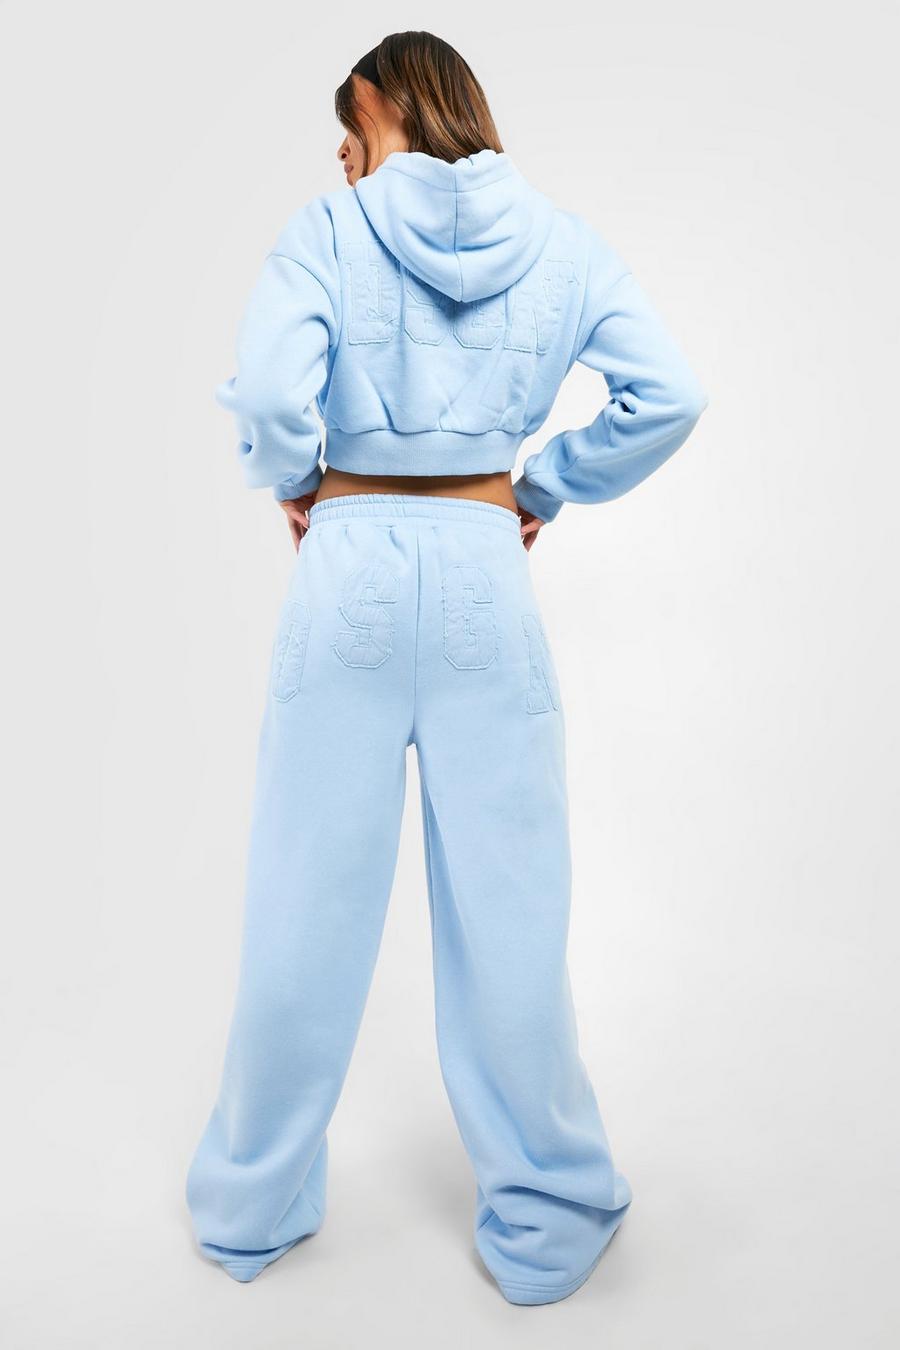 Baby blue Dsgn Studio Self Fabric Applique Hooded Tracksuit 